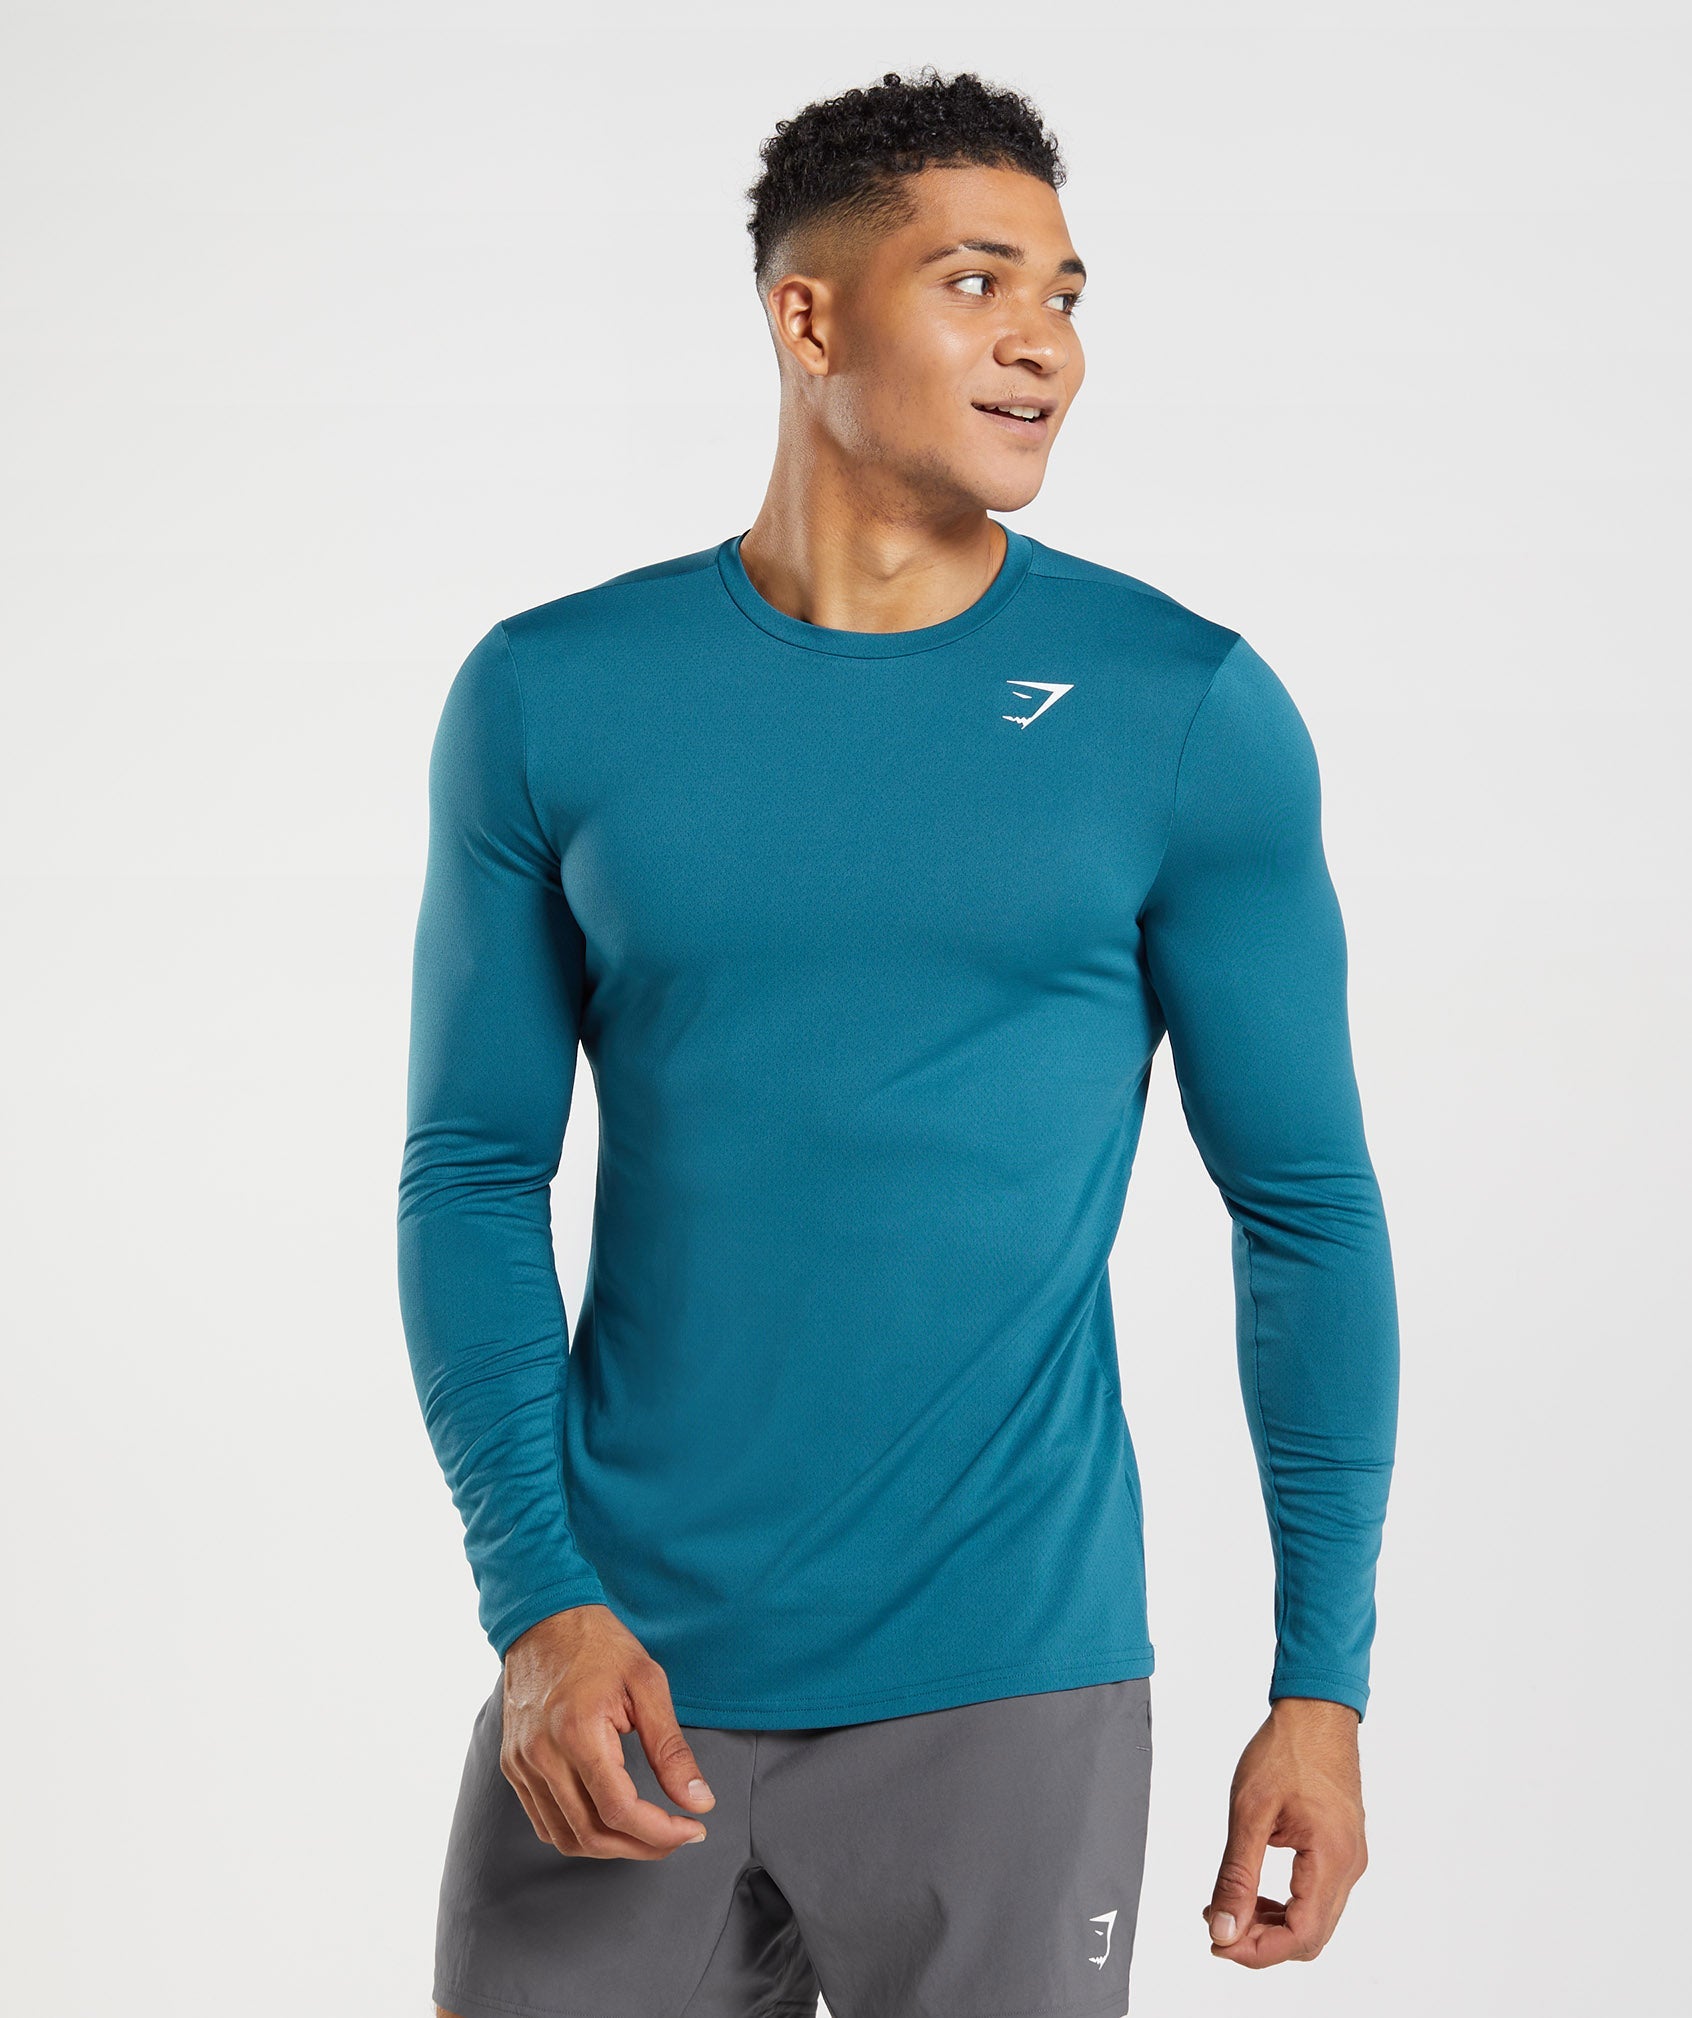 Arrival Long Sleeve T-Shirt in Atlantic Blue - view 1